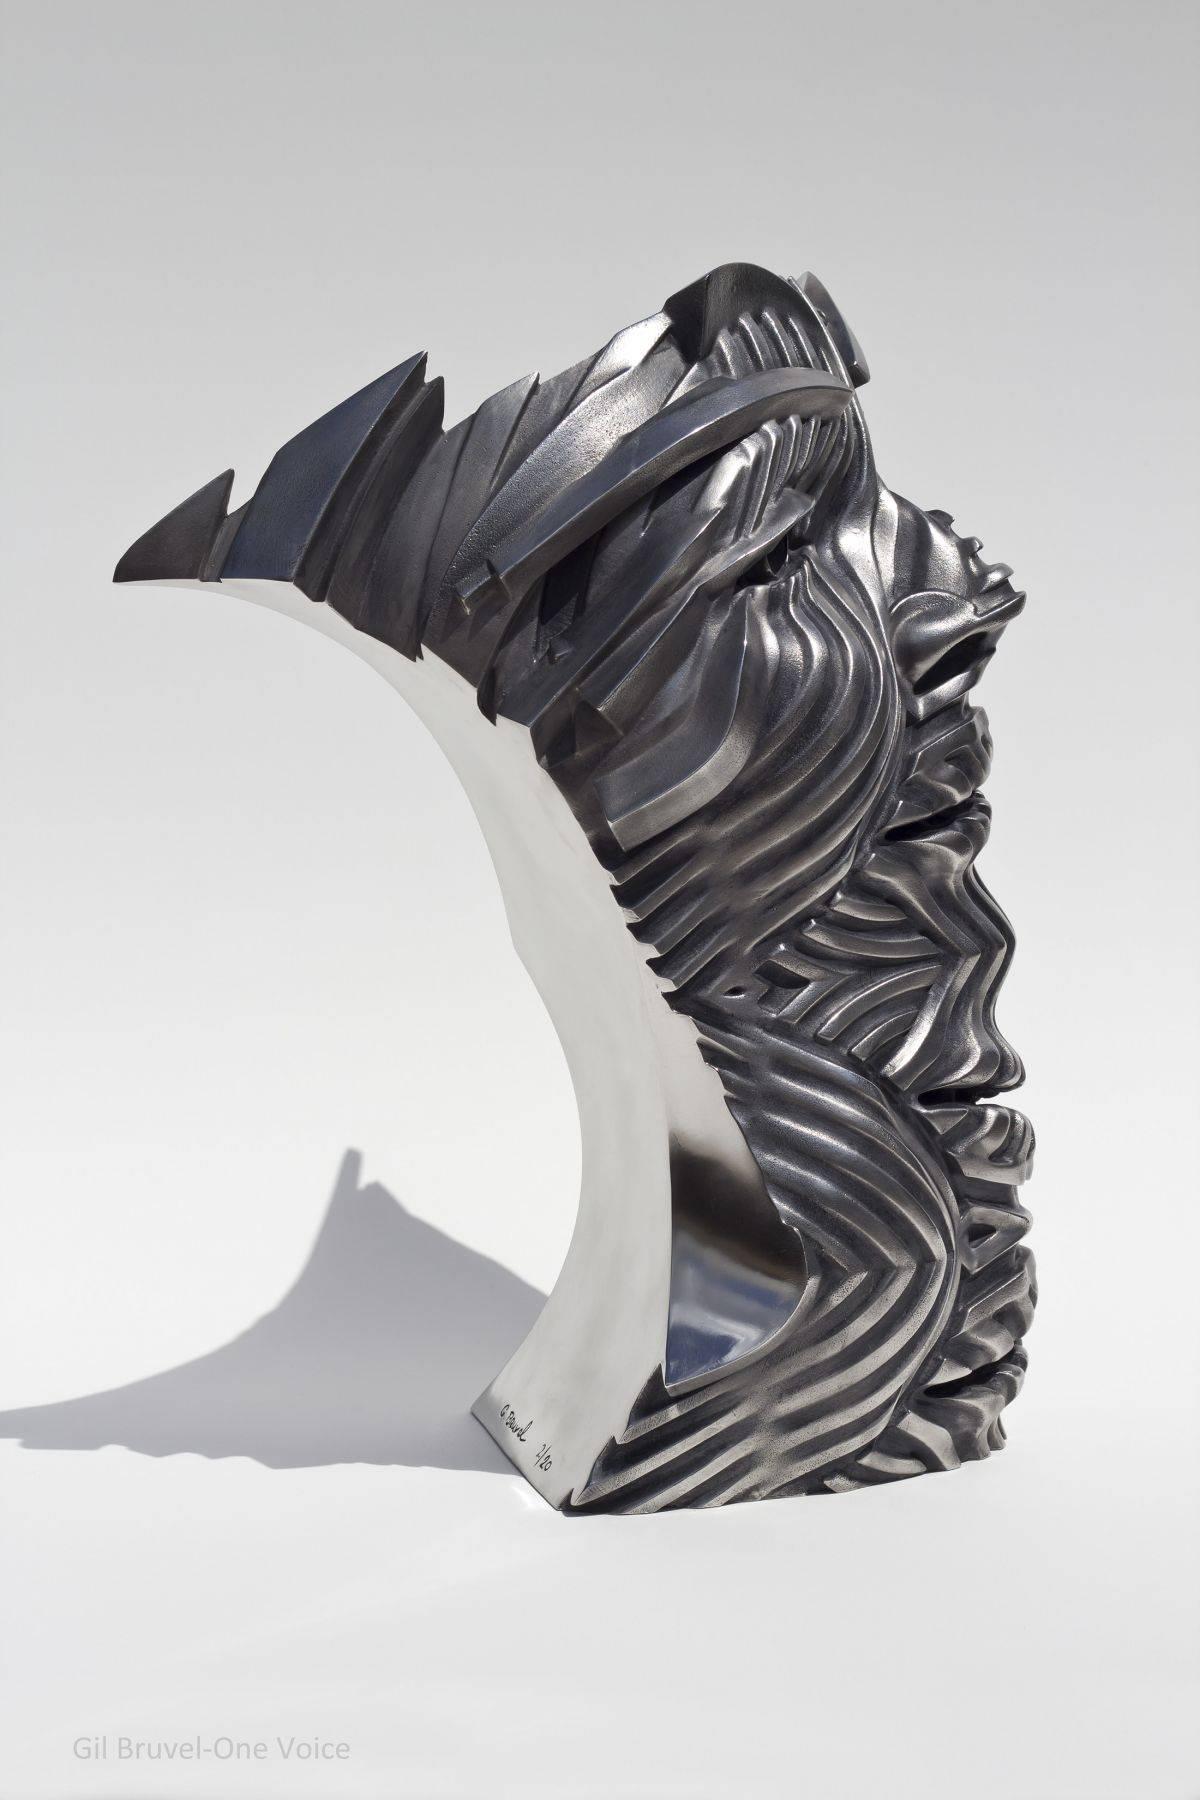 One Voice - Contemporary Sculpture by Gil Bruvel